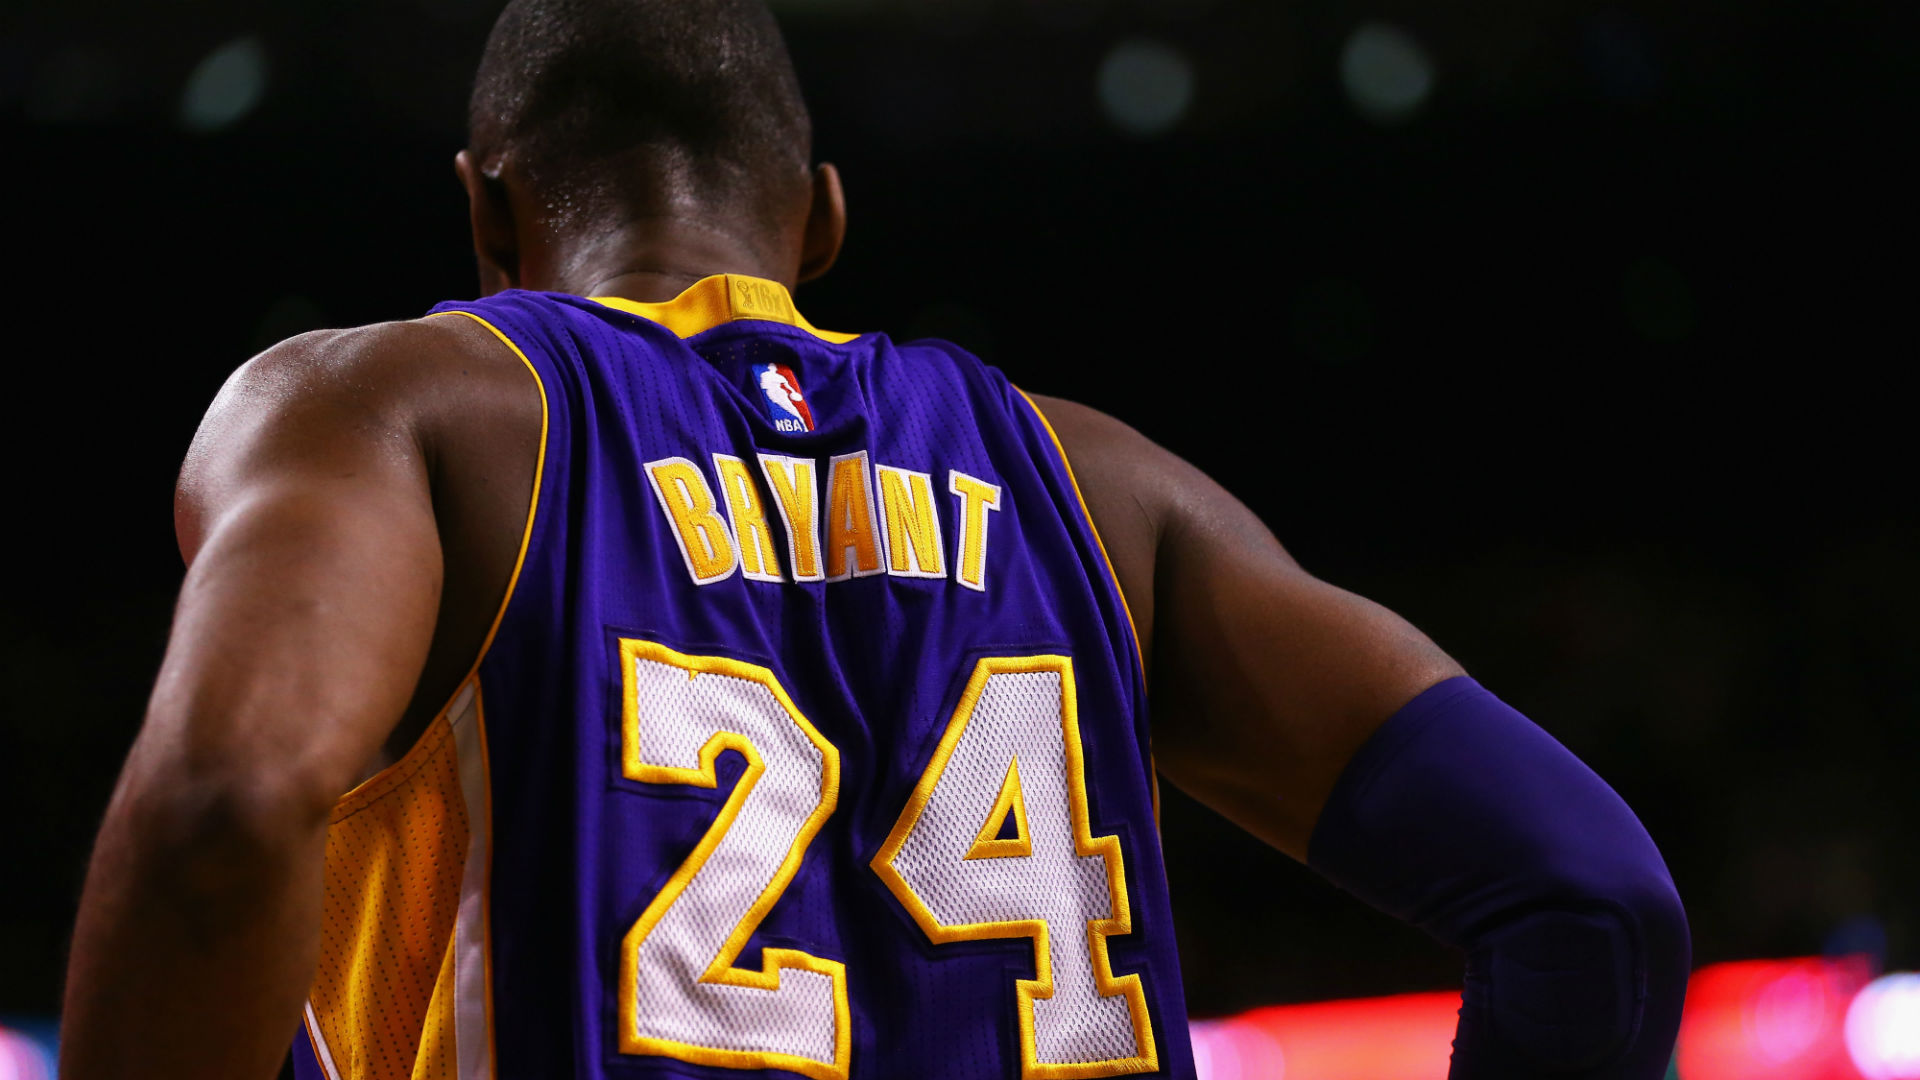 Kobe Bryant becomes third player to score 33,000 points | Sporting News1920 x 1080